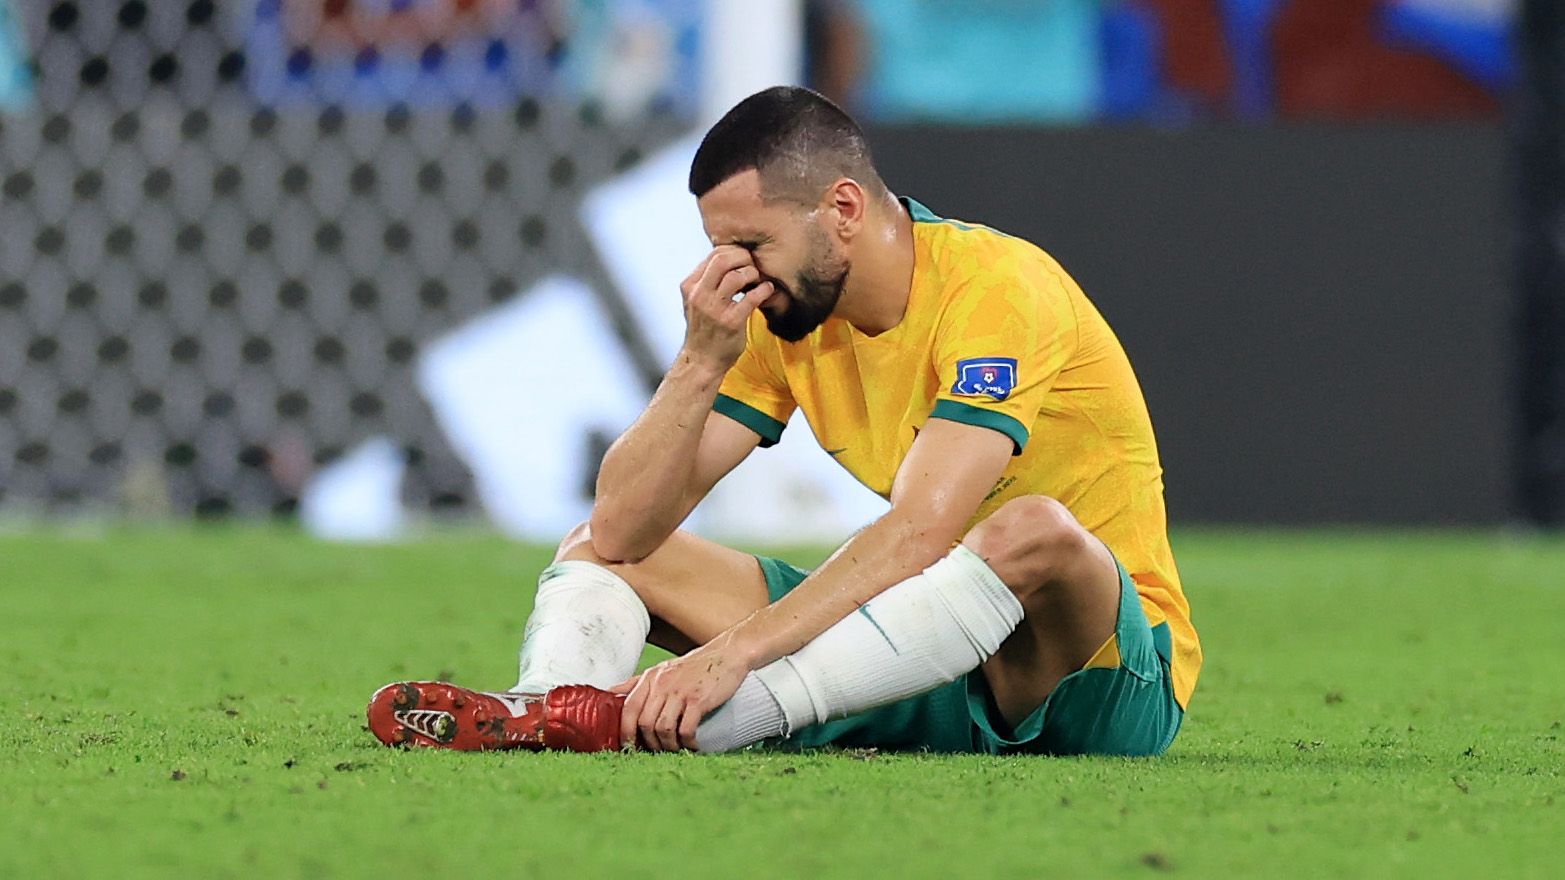 Aziz Behich of Australia shows dejection after the 1-2 defeat in the FIFA World Cup Qatar 2022 Round of 16 match between Argentina and Australia at Ahmad Bin Ali Stadium on December 03, 2022 in Doha, Qatar. (Photo by Buda Mendes/Getty Images)